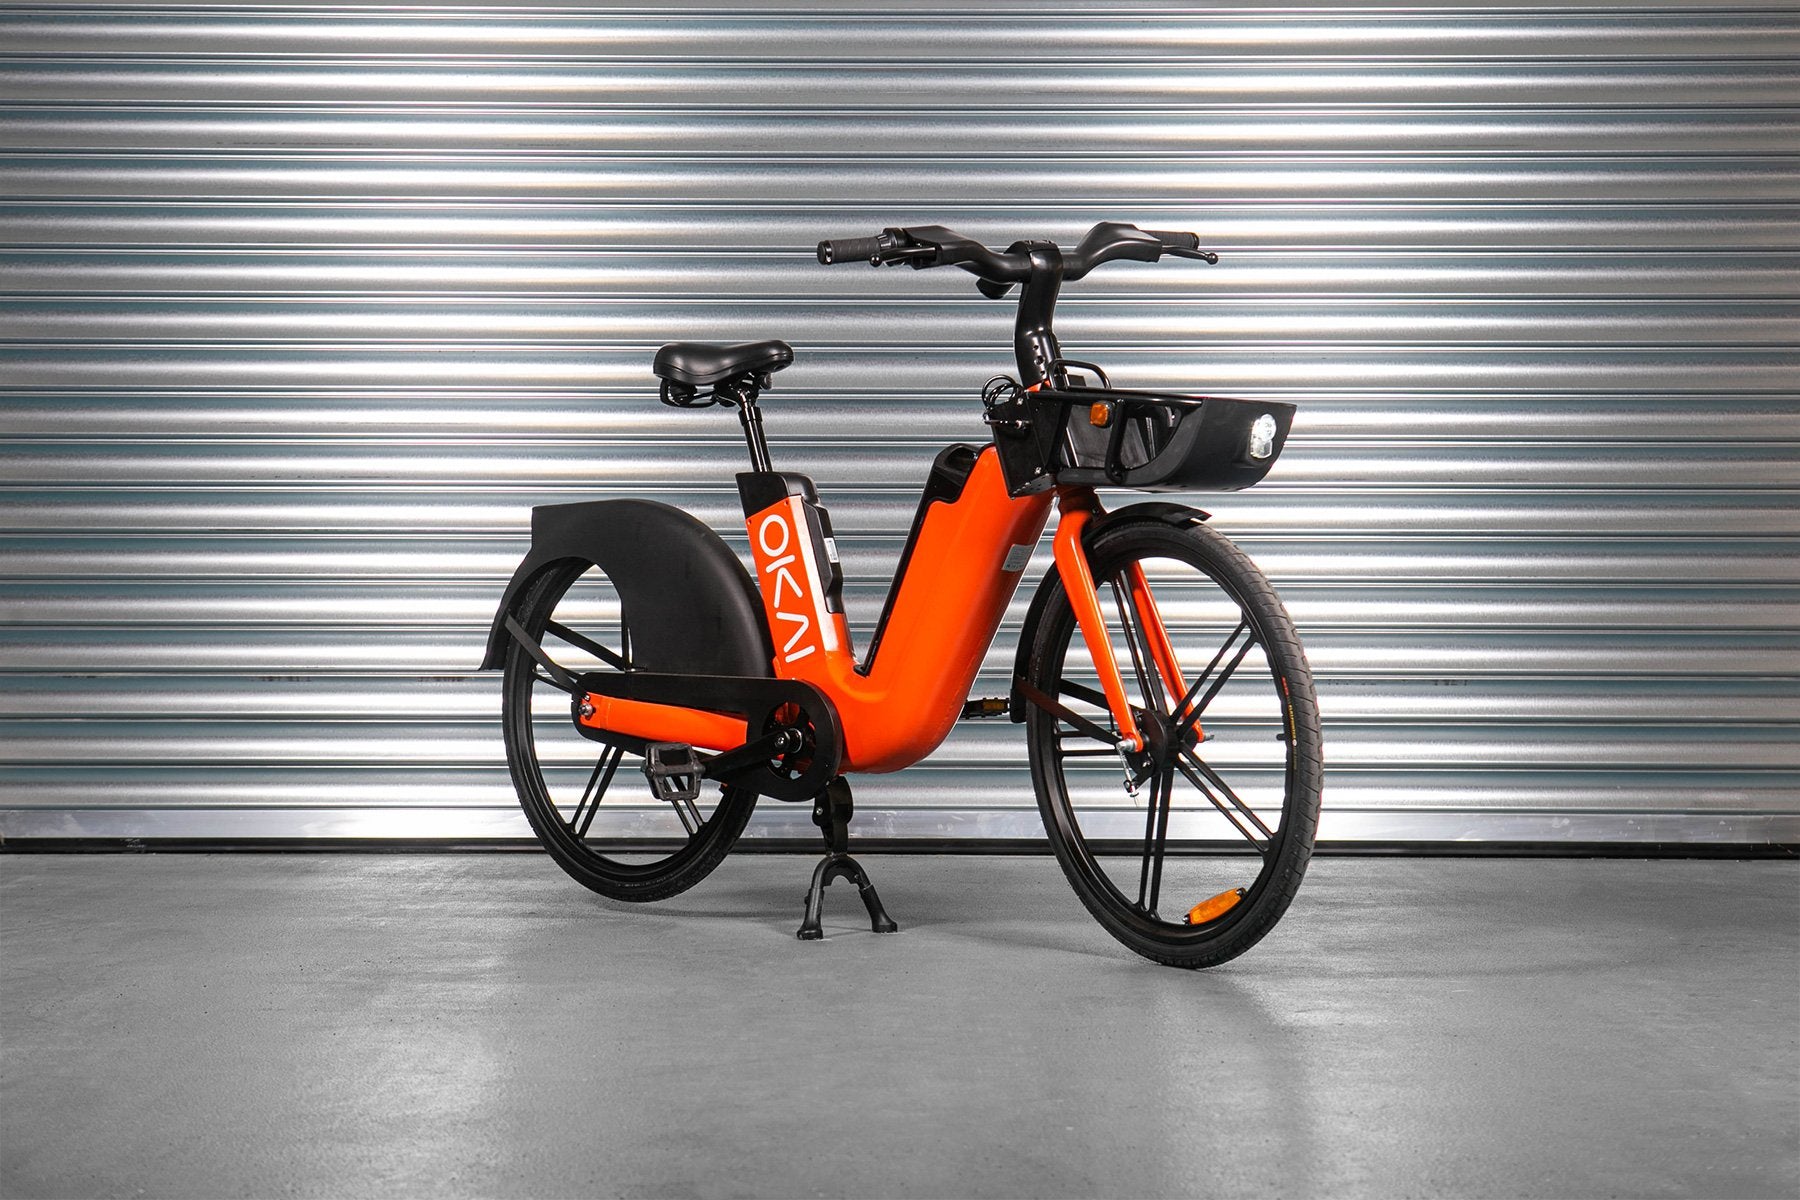 Why the Okai EB100 might be the best sharing e-bike for your fleet